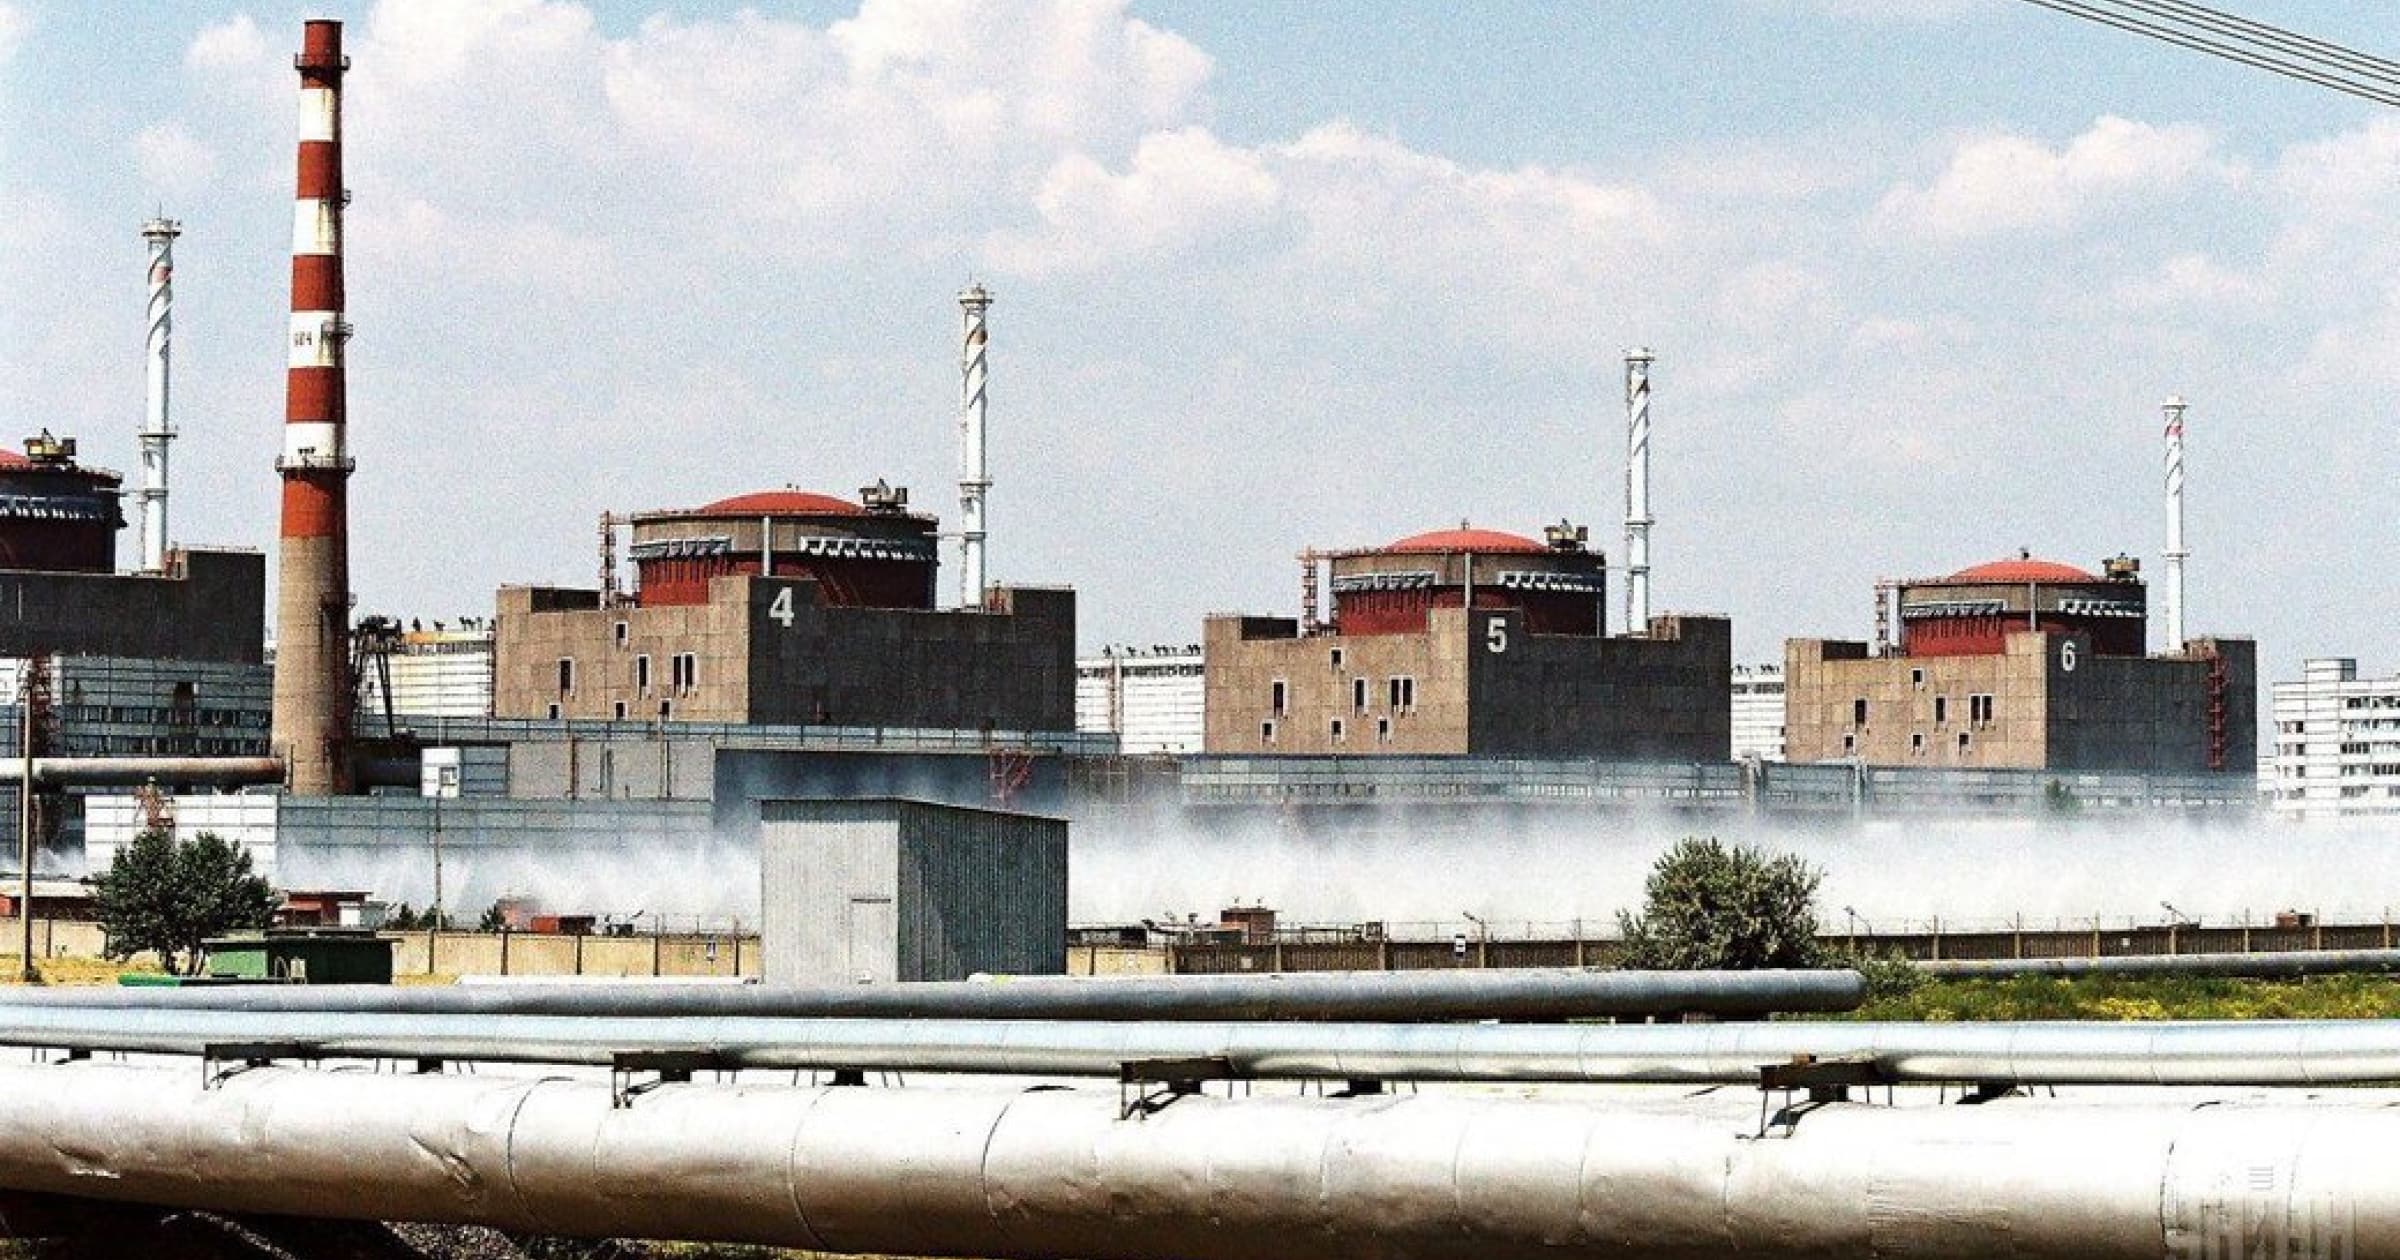 The Zaporizhzhia NPP lost connection to the main power transmission line and stopped one of the power units due to network limitations